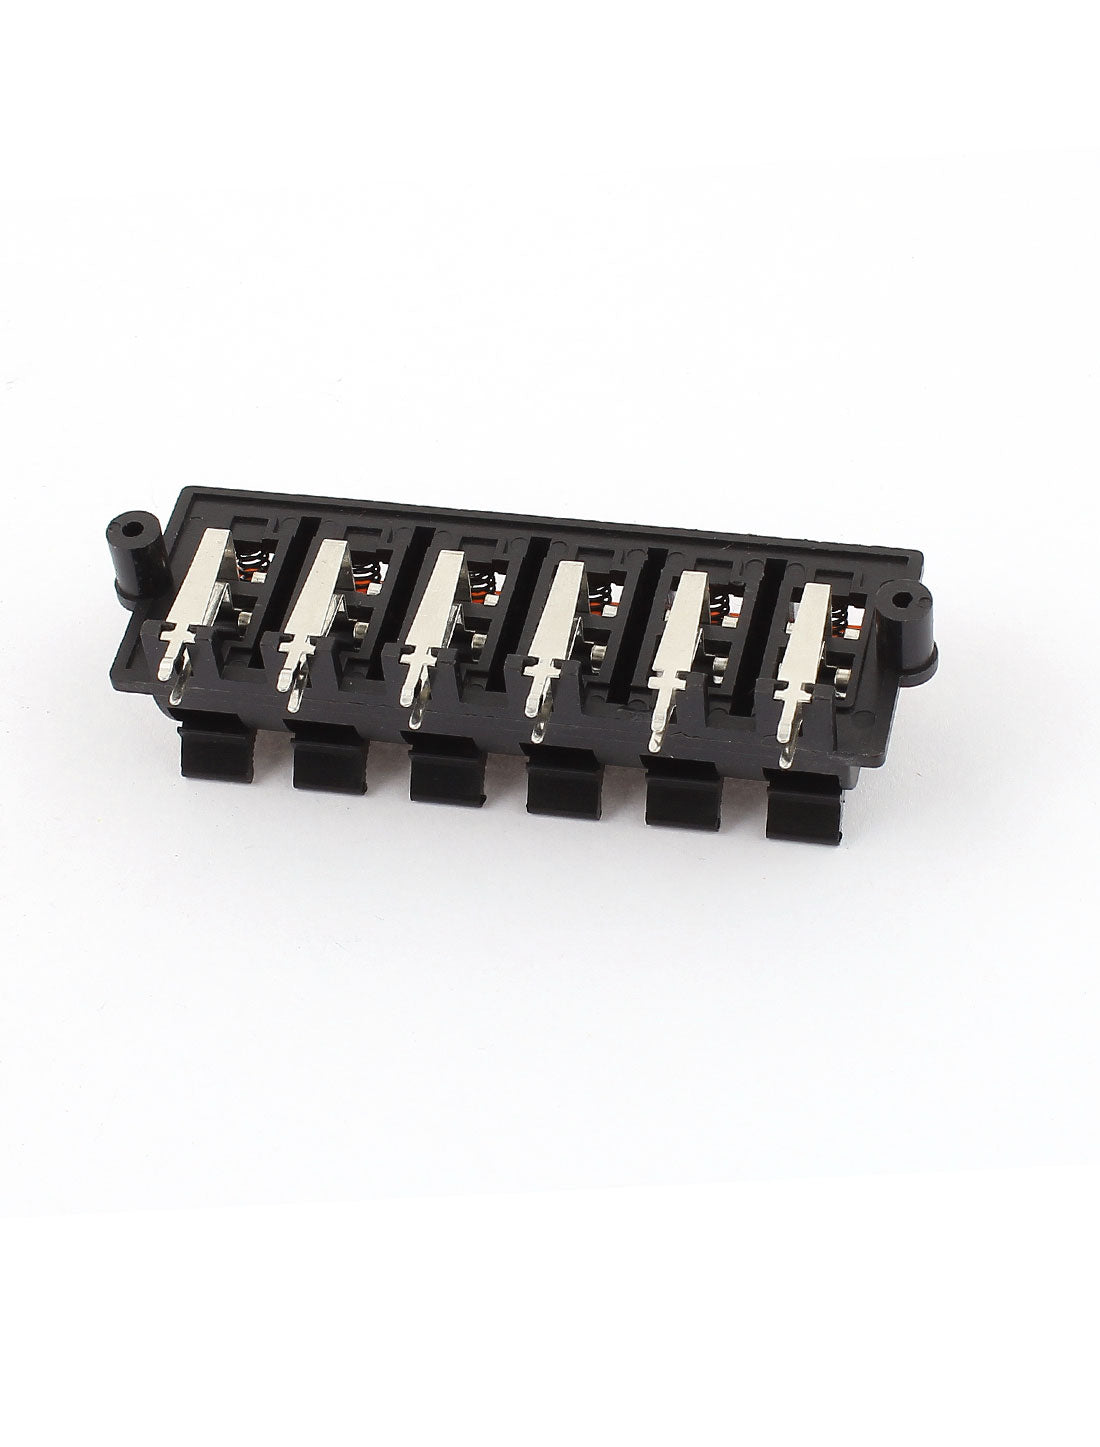 uxcell Uxcell Black Red Double Row 12 Position Spring Push Type Audio Speaker Terminal Junction Box Board Connector